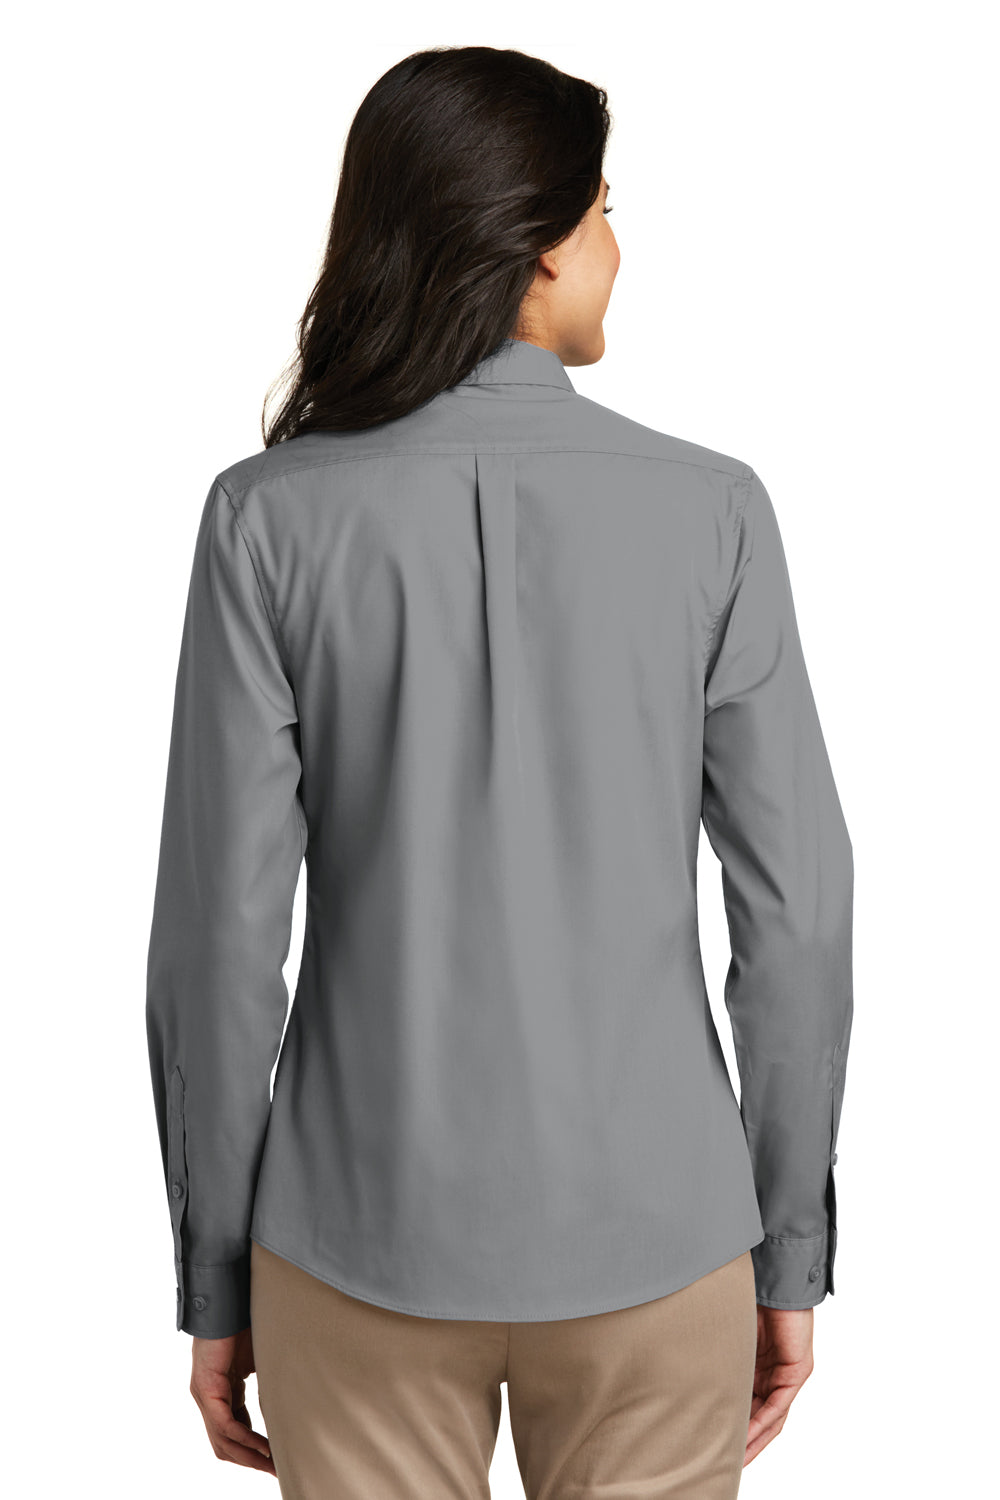 Port Authority LW100 Womens Carefree Stain Resistant Long Sleeve Button Down Shirt Gusty Grey Back